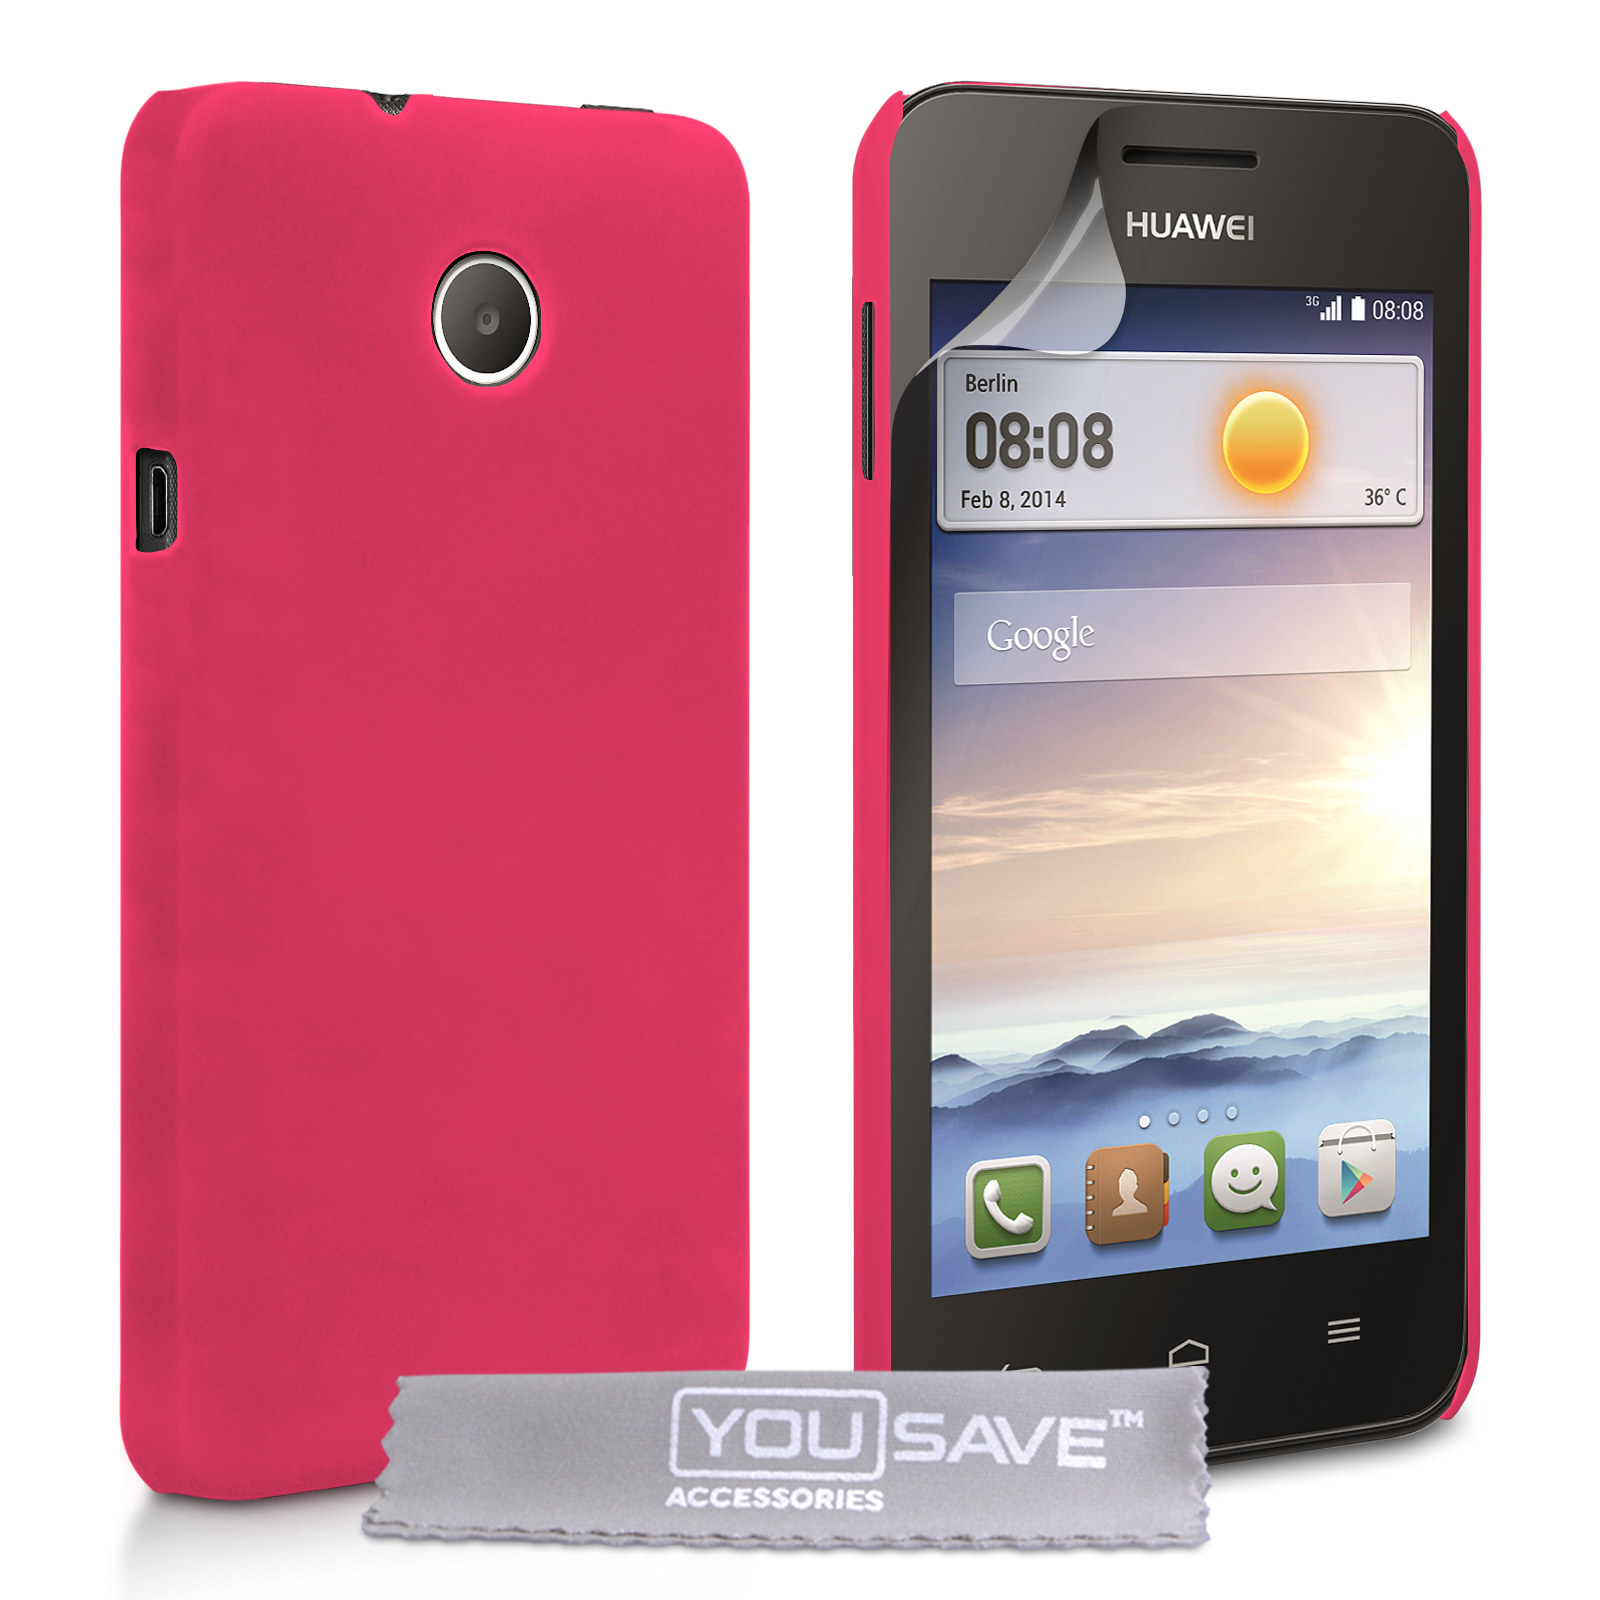 YouSave Accessories Huawei Ascend Y330 Hard Hybrid Case - Hot Pink